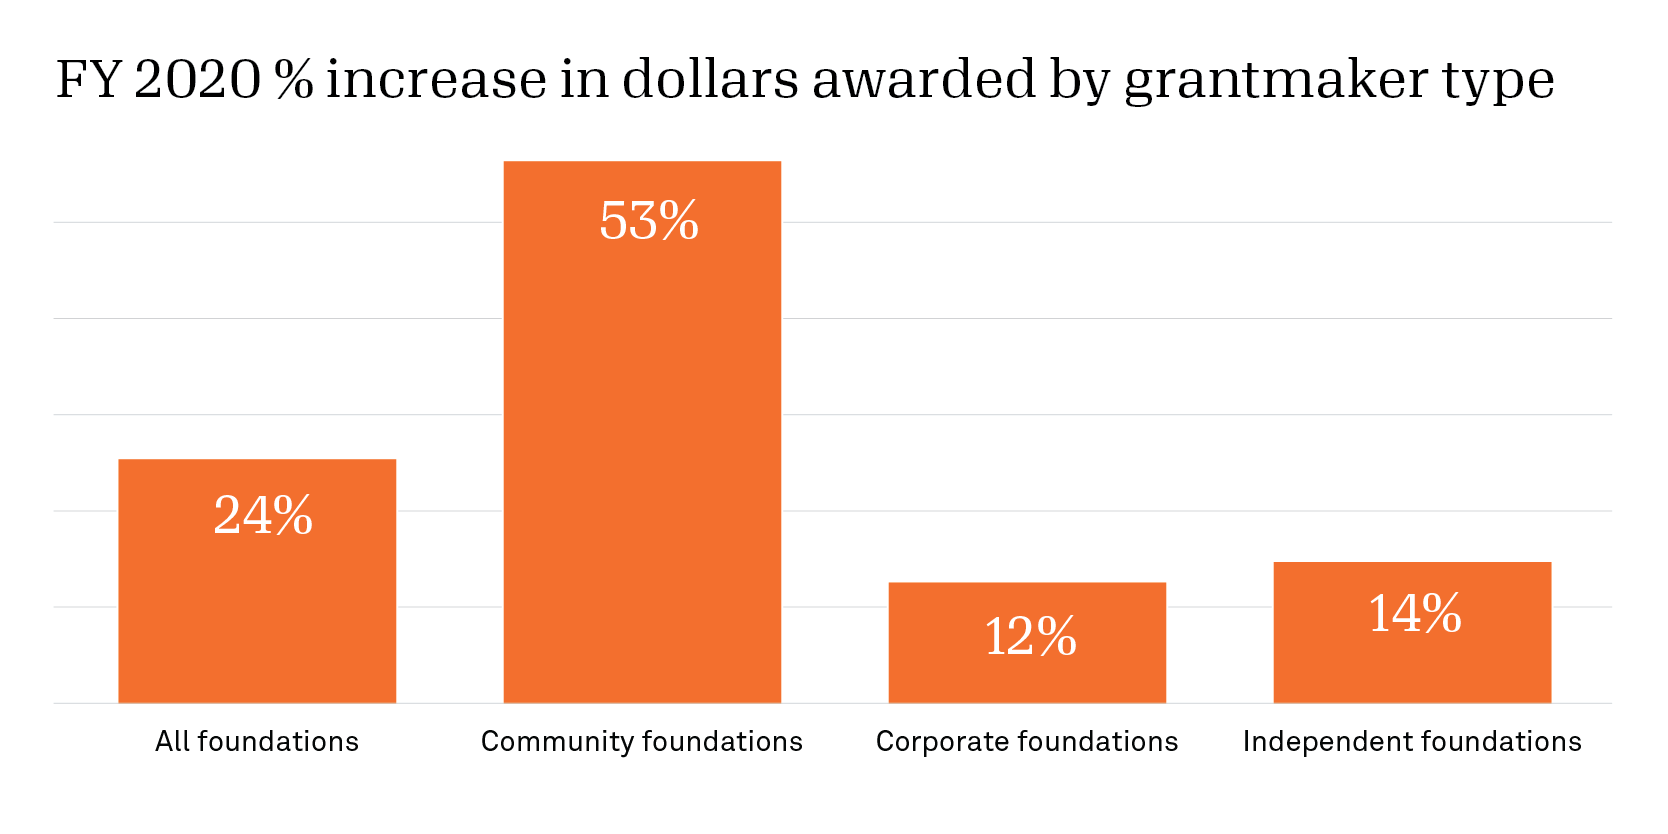 Bar graph of FY 2020 percent increase in dollars awarded by grantmaker type